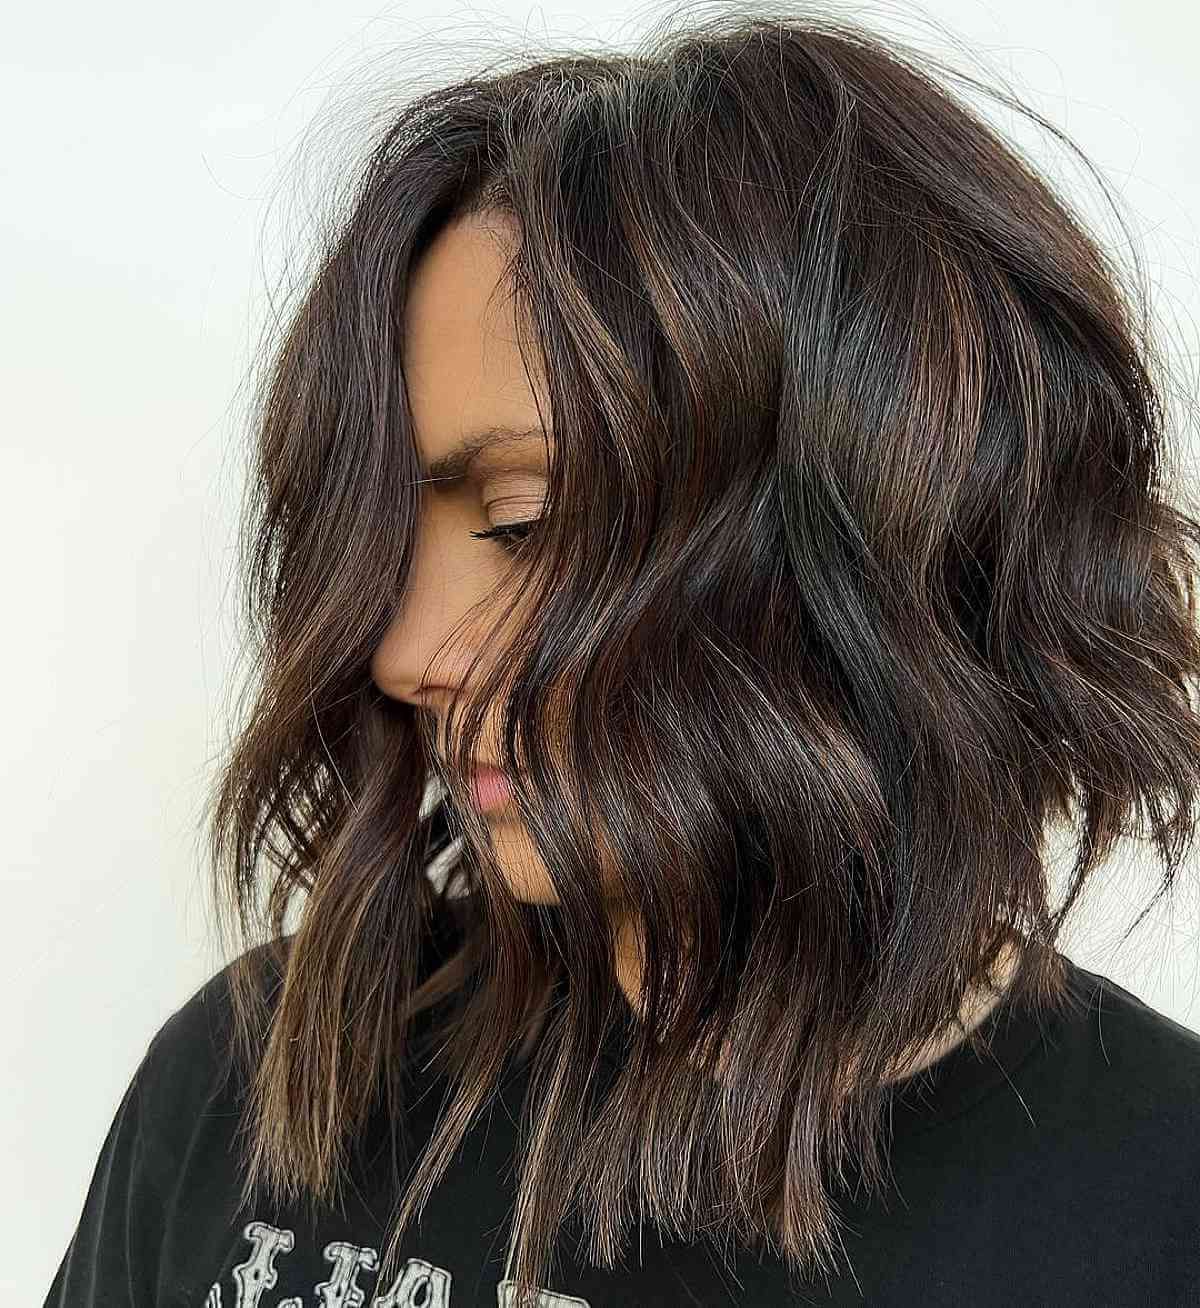 43 Coolest Long Choppy Bob Haircuts For That Beachy Lob Look Pertaining To Most Recent Choppy Lob With Balayage Highlights (Photo 4 of 18)